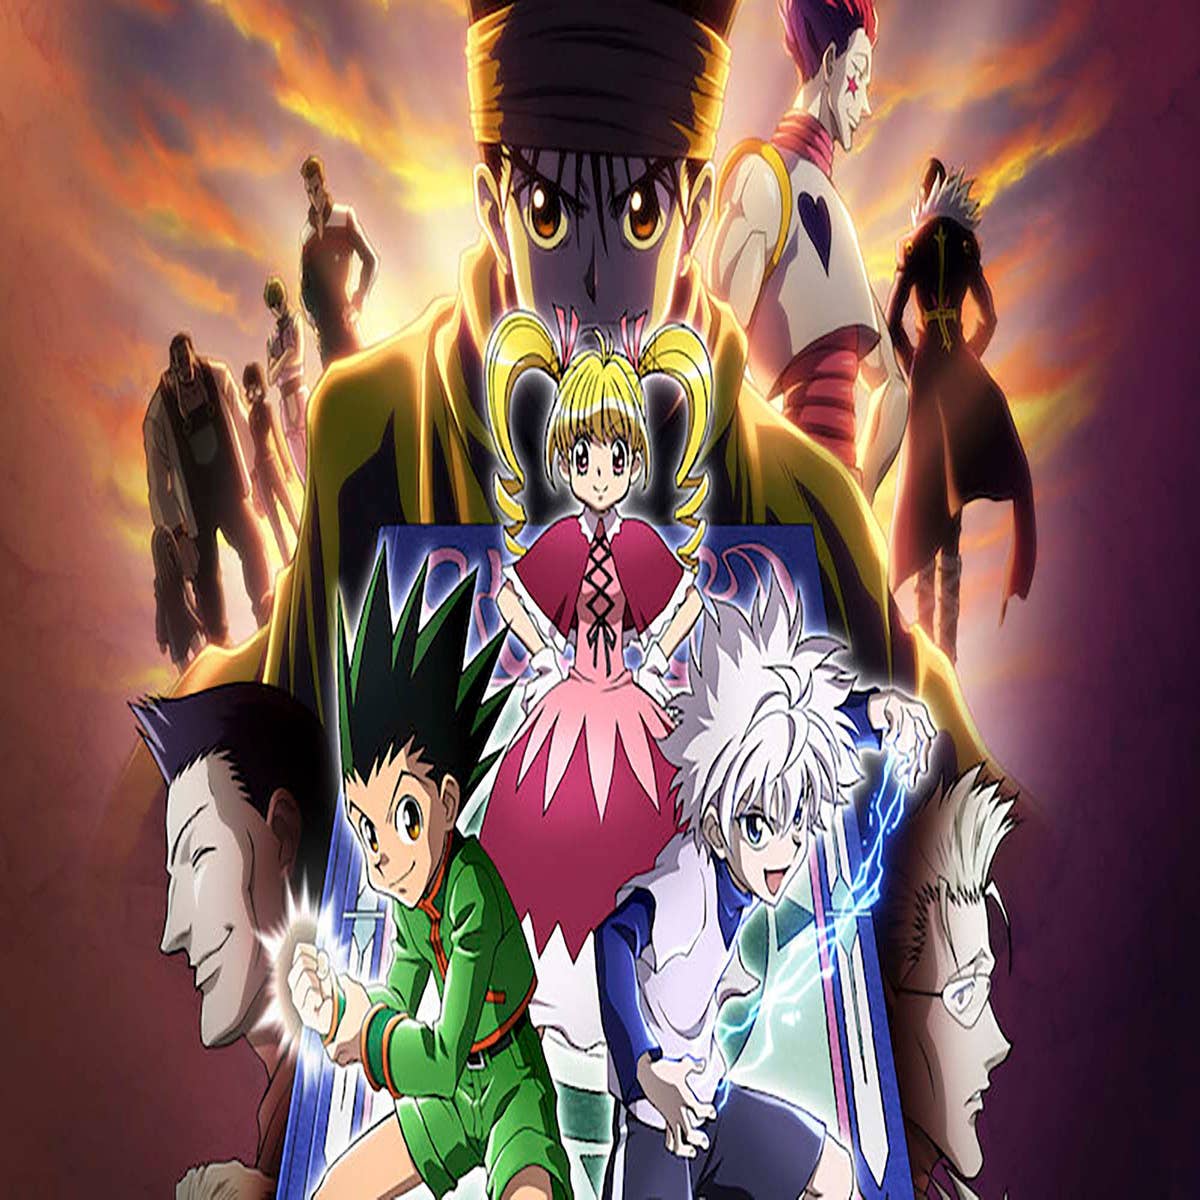 How did the Hunter x Hunter original anime finish if not even the manga is  finished yet, and why aren't the anime creators continuing to create  episodes while the Manga is on